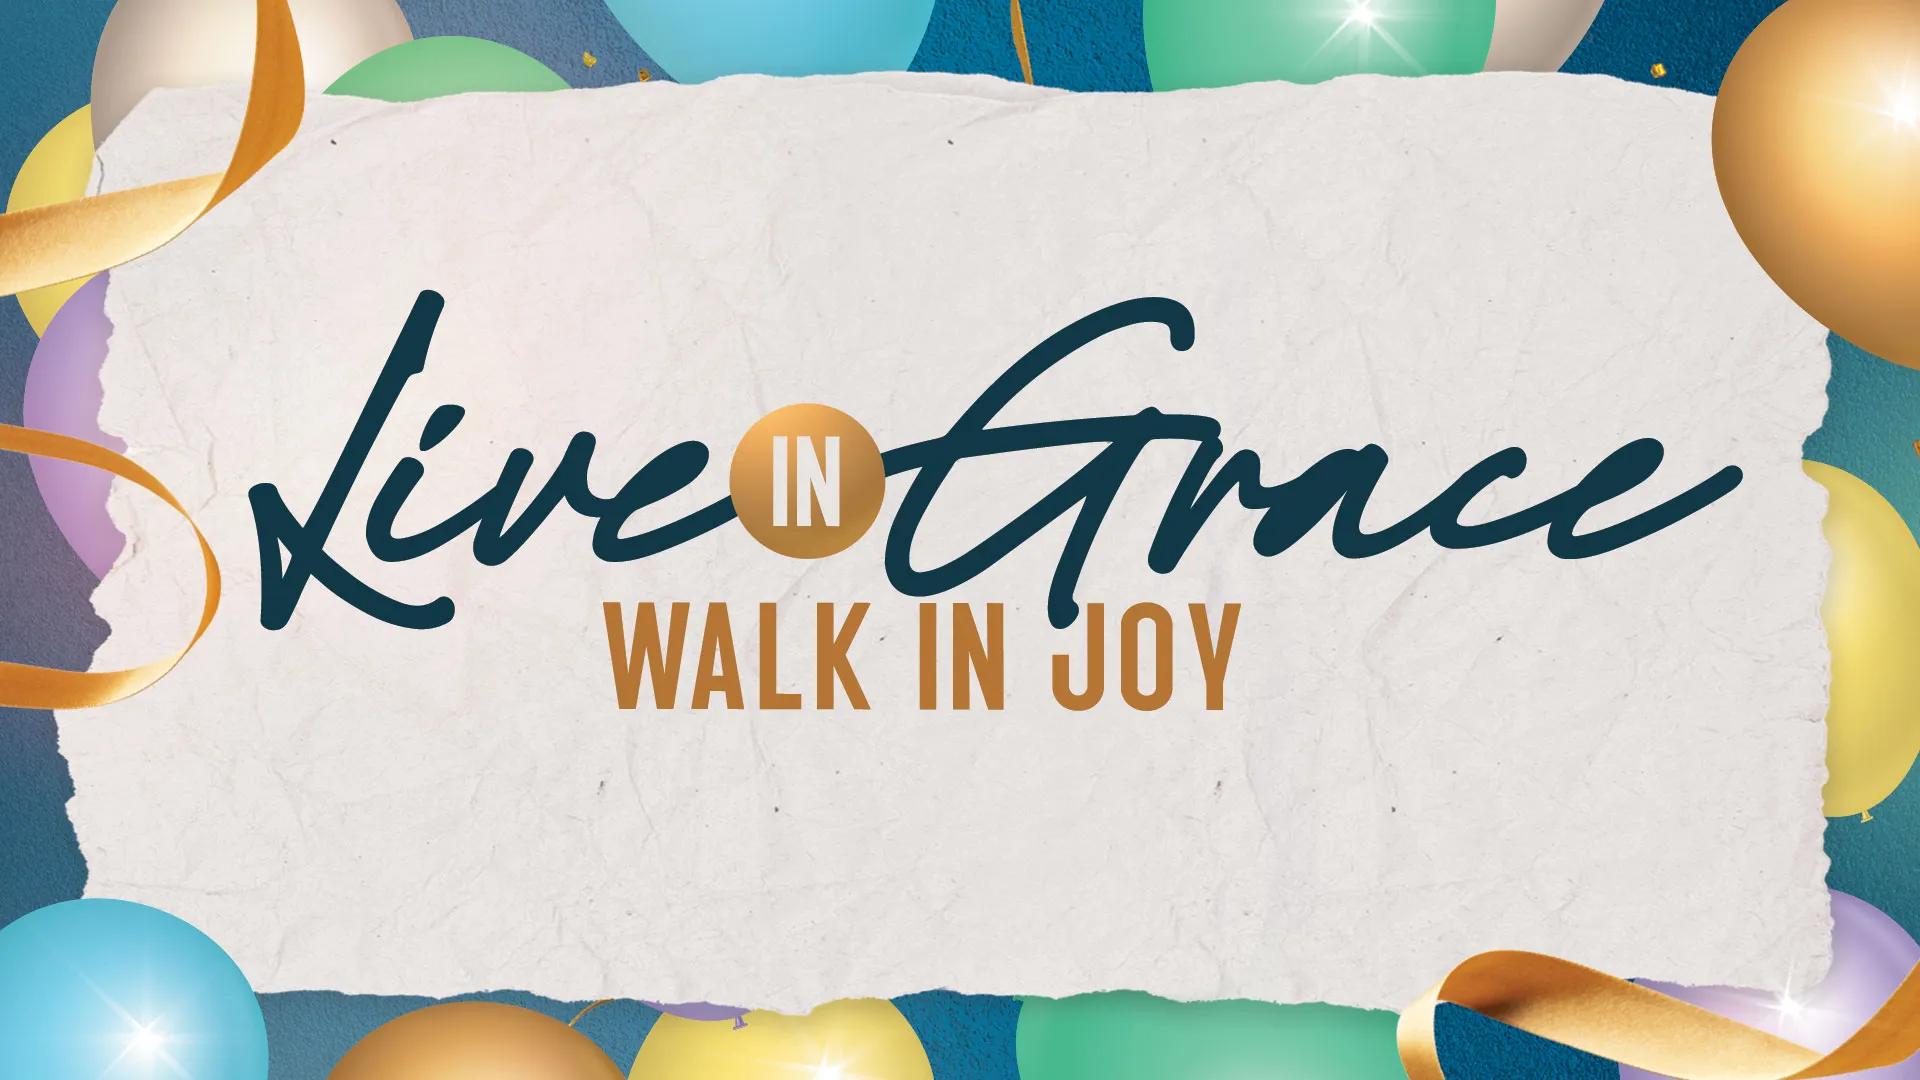 A backdrop full of balloons with the words "live in grace, walk in joy" written on a paper-like background.